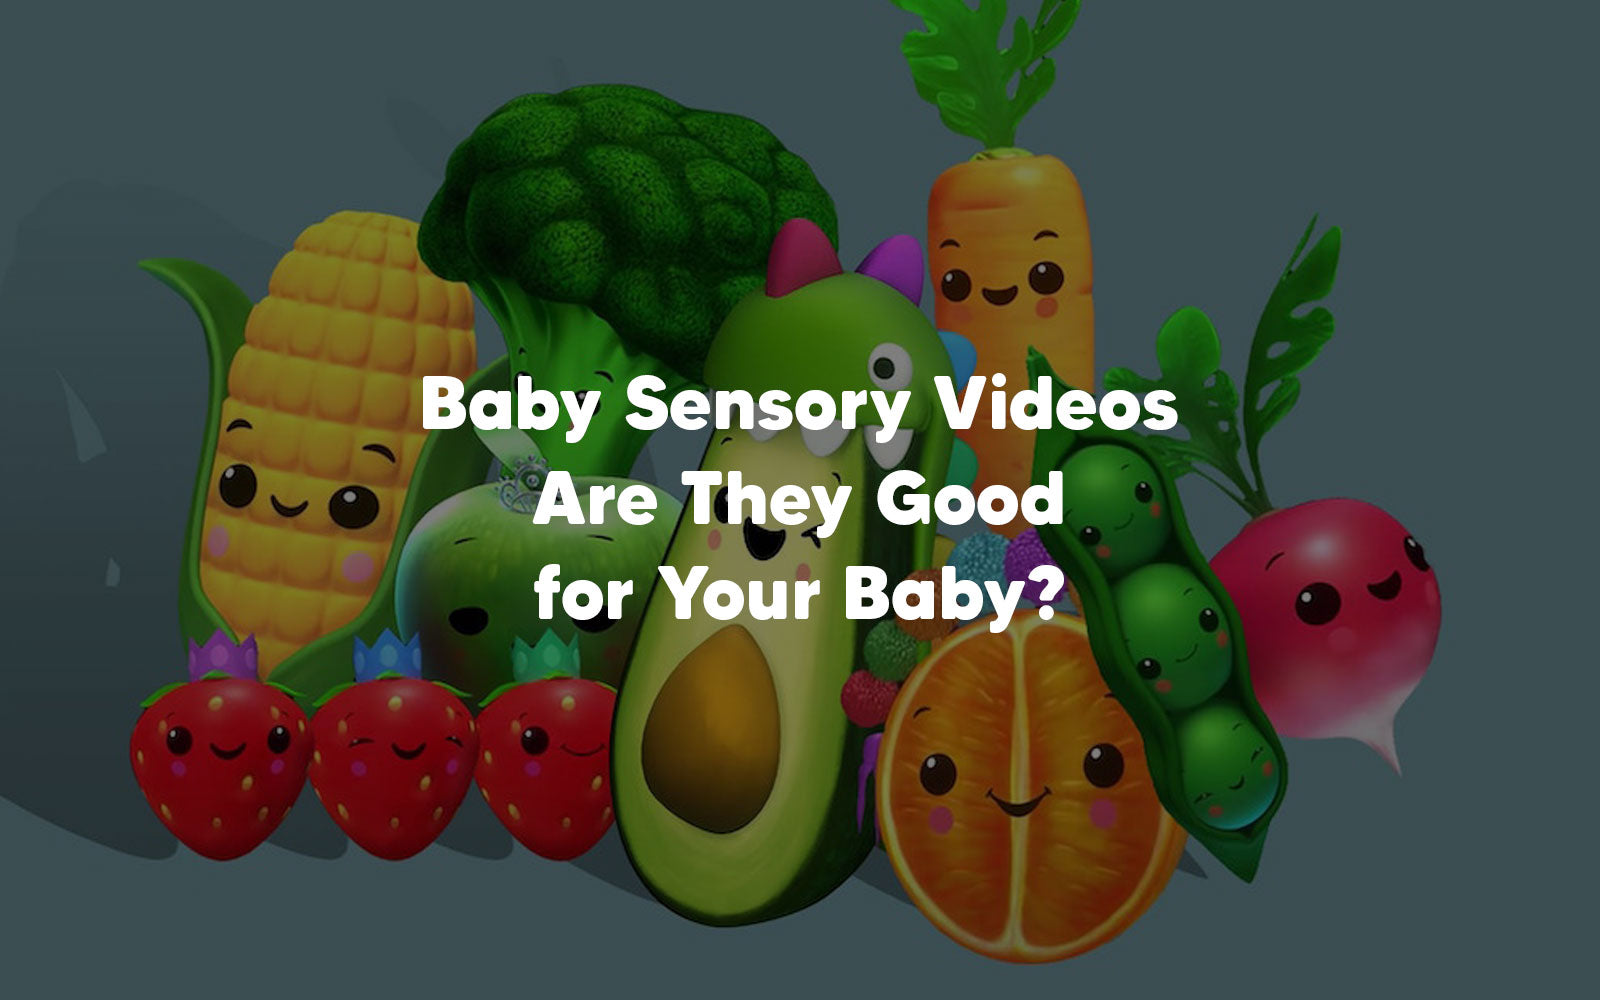 Are Baby Sensory Videos Good For Your Baby?